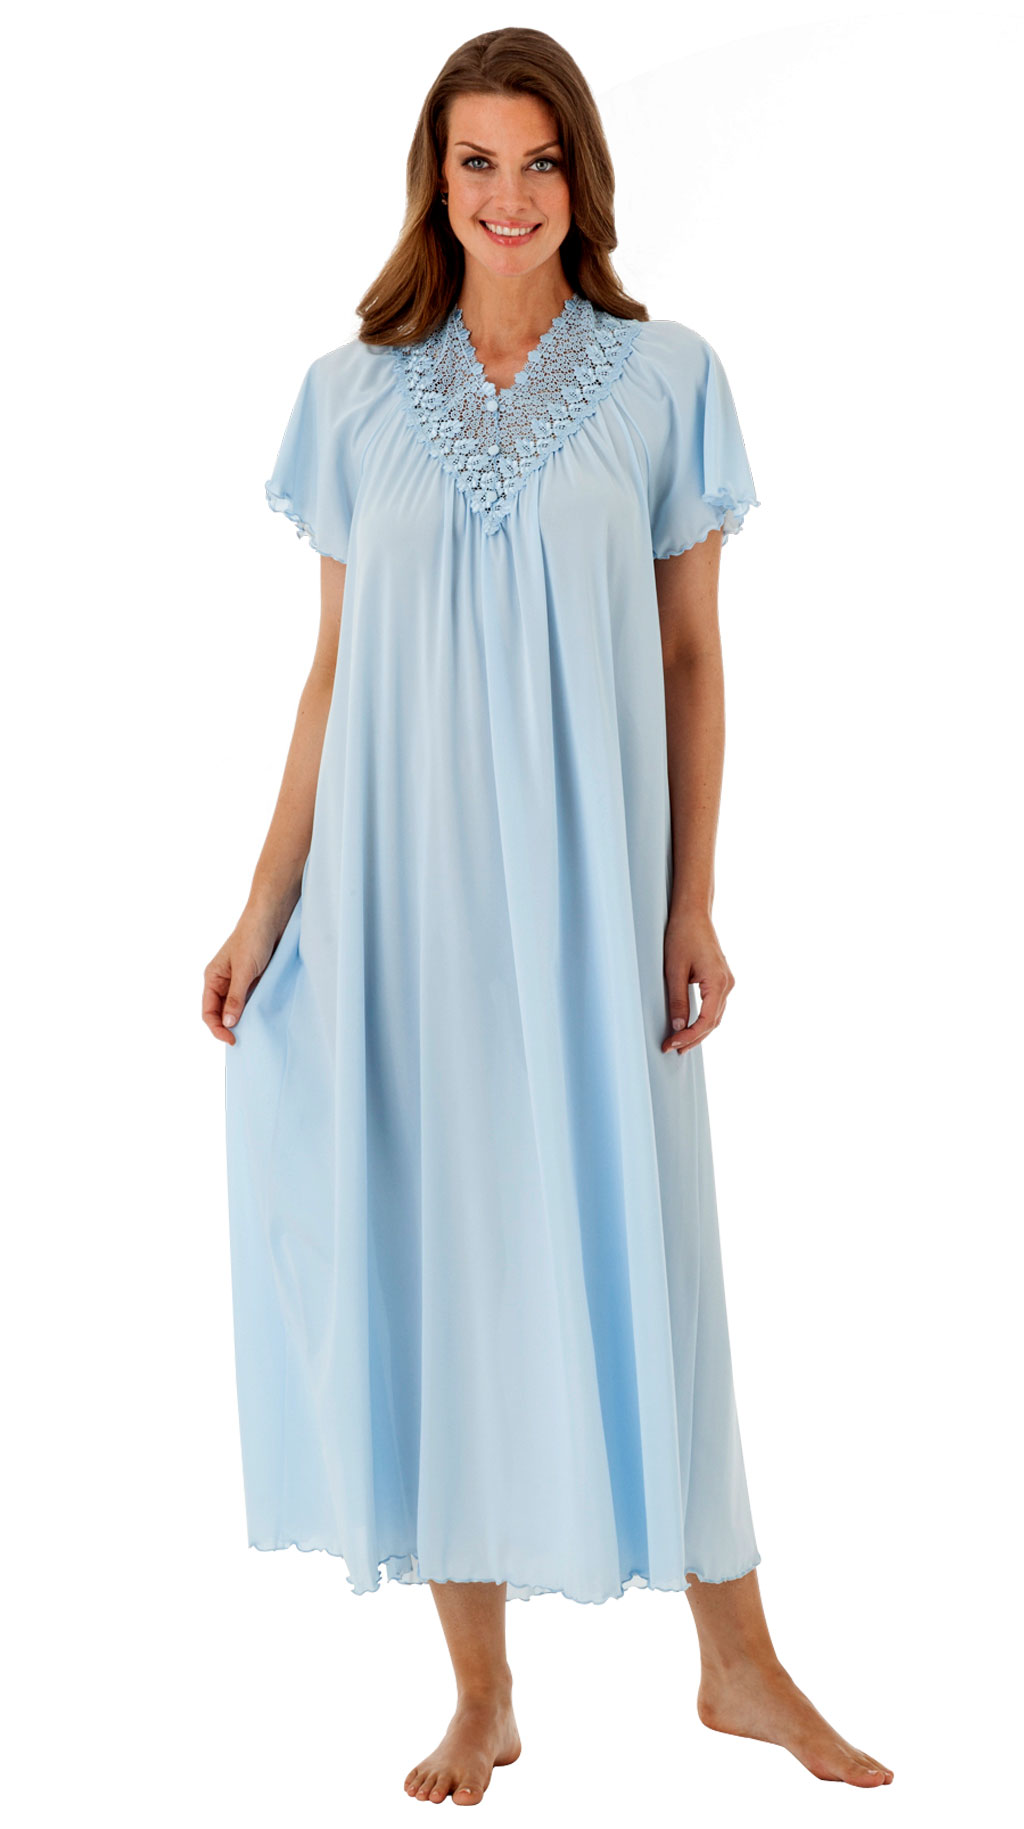 Women's Long Embroidered Lace Nightgown